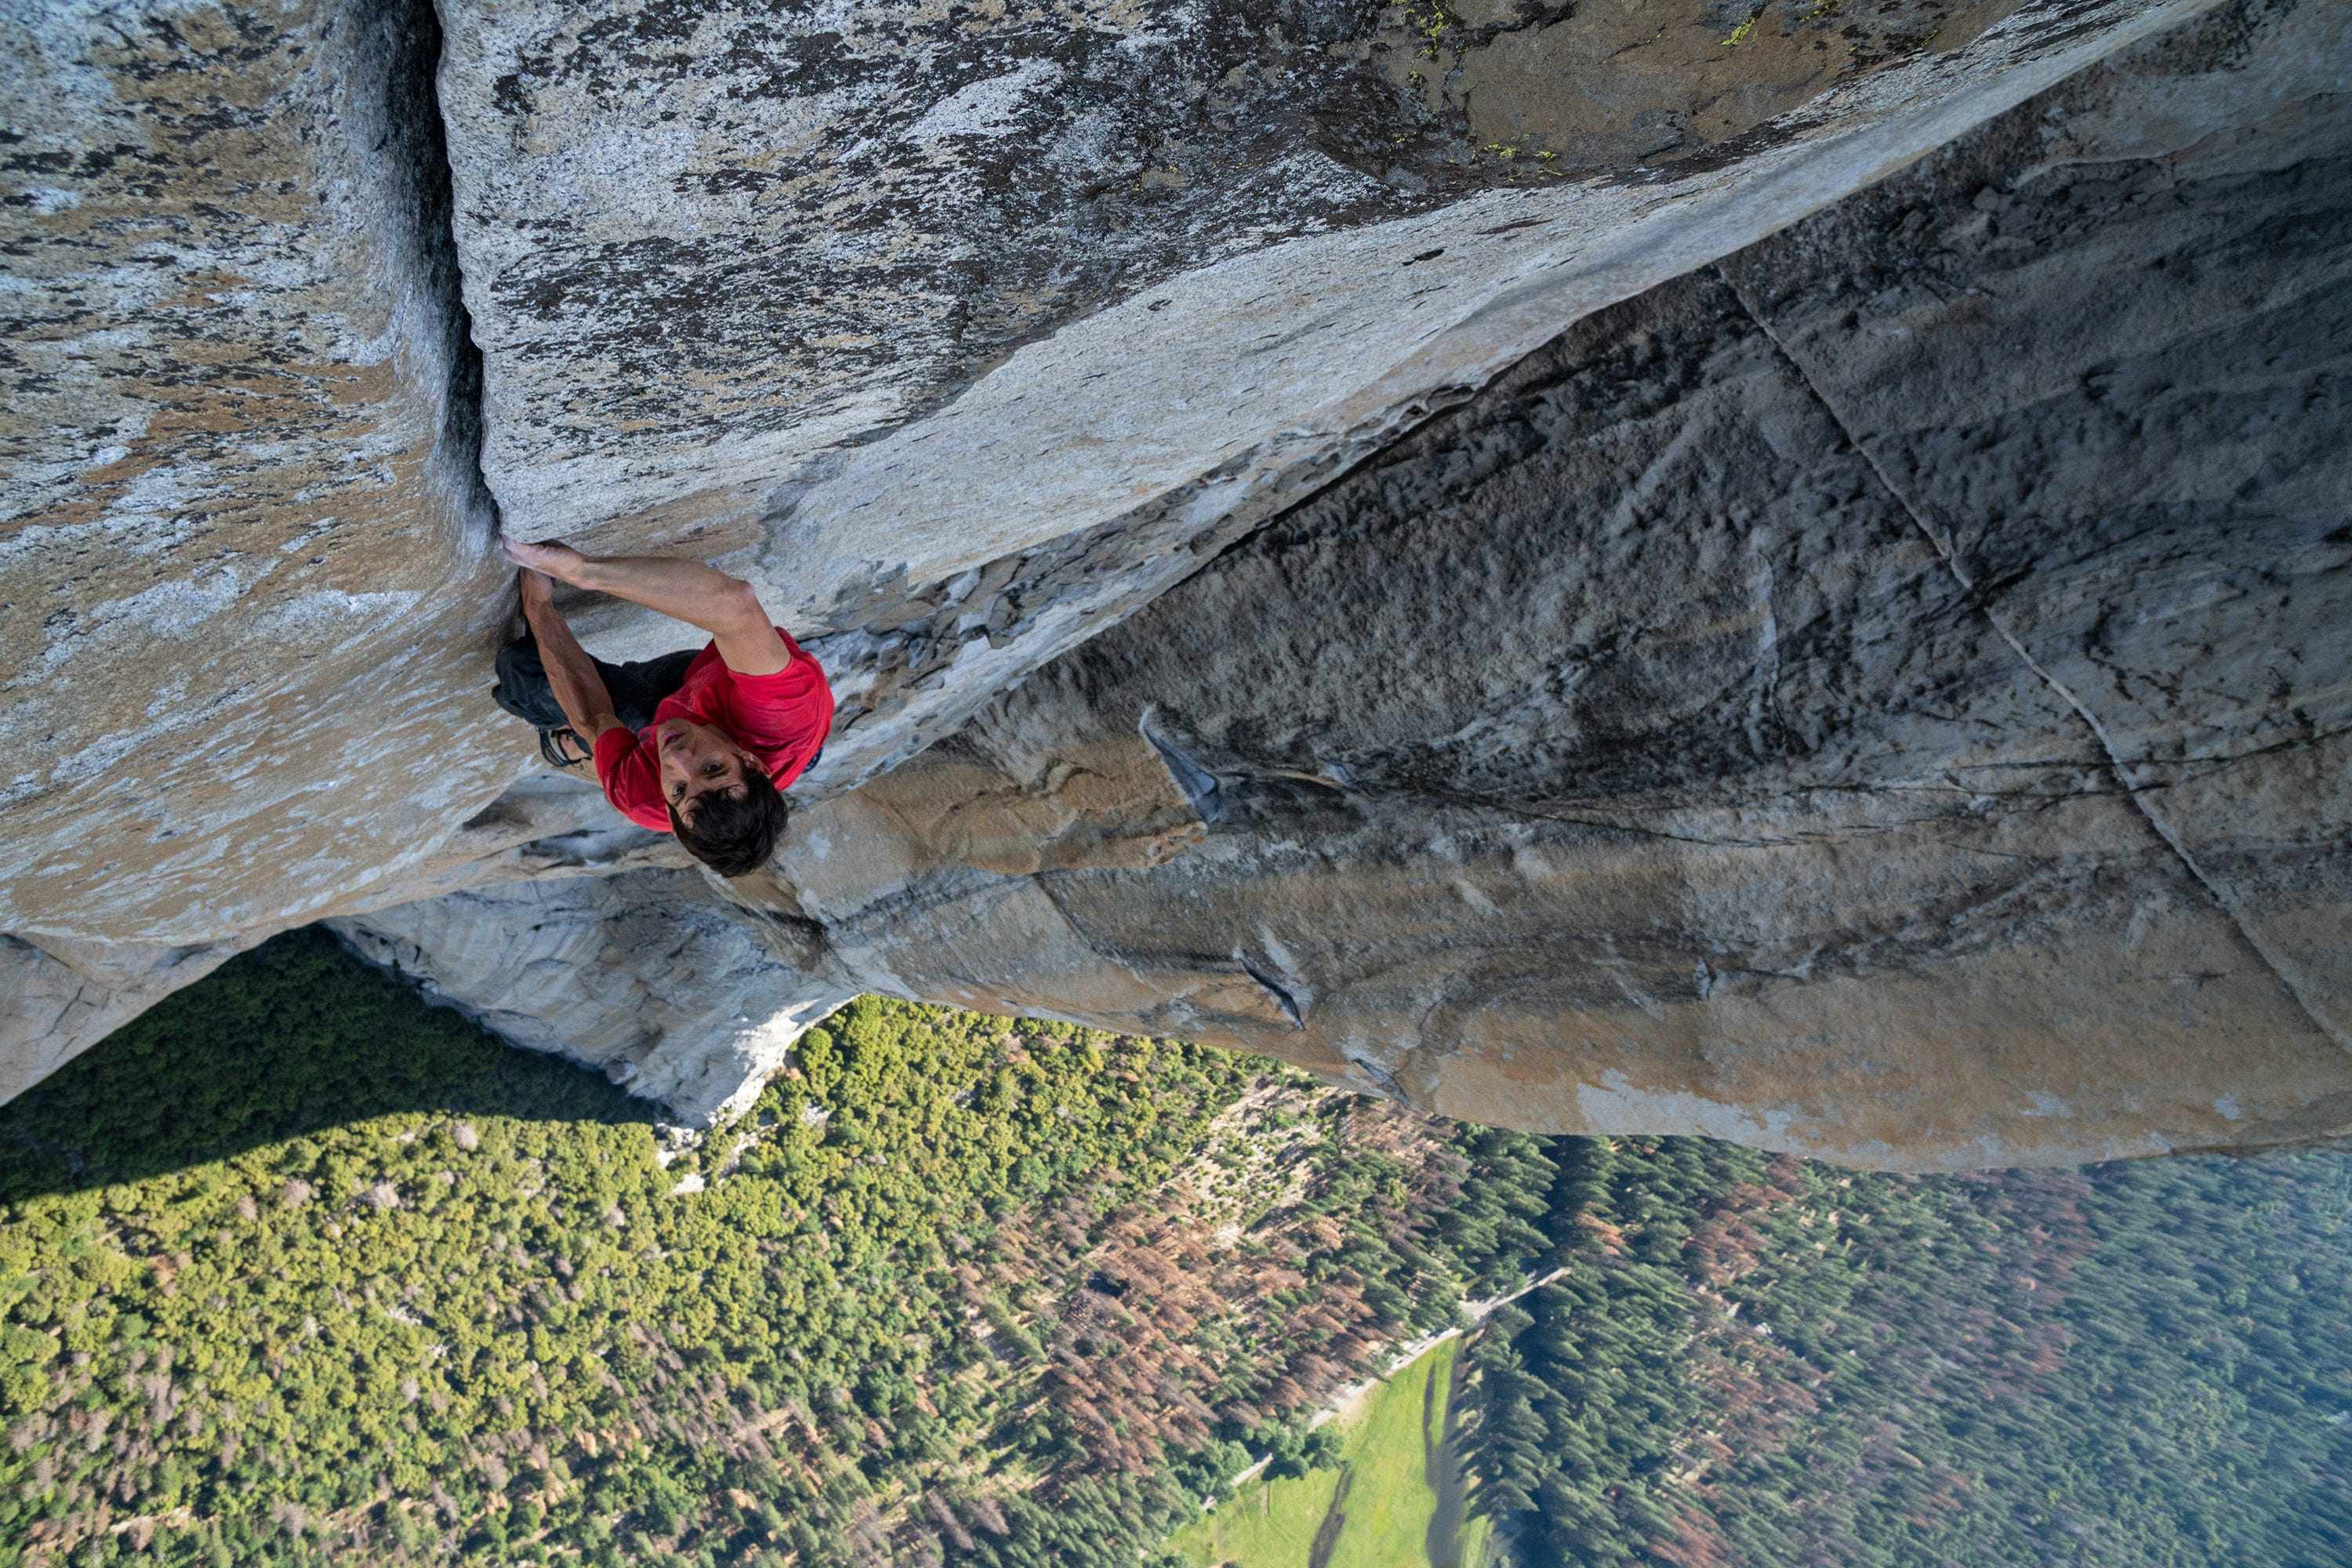 Rock climber Alex Honnold features in one episode of the new 10-part National Geographic series “Edge of the Unknown with Jimmy Chin”. Photo: National Geographic